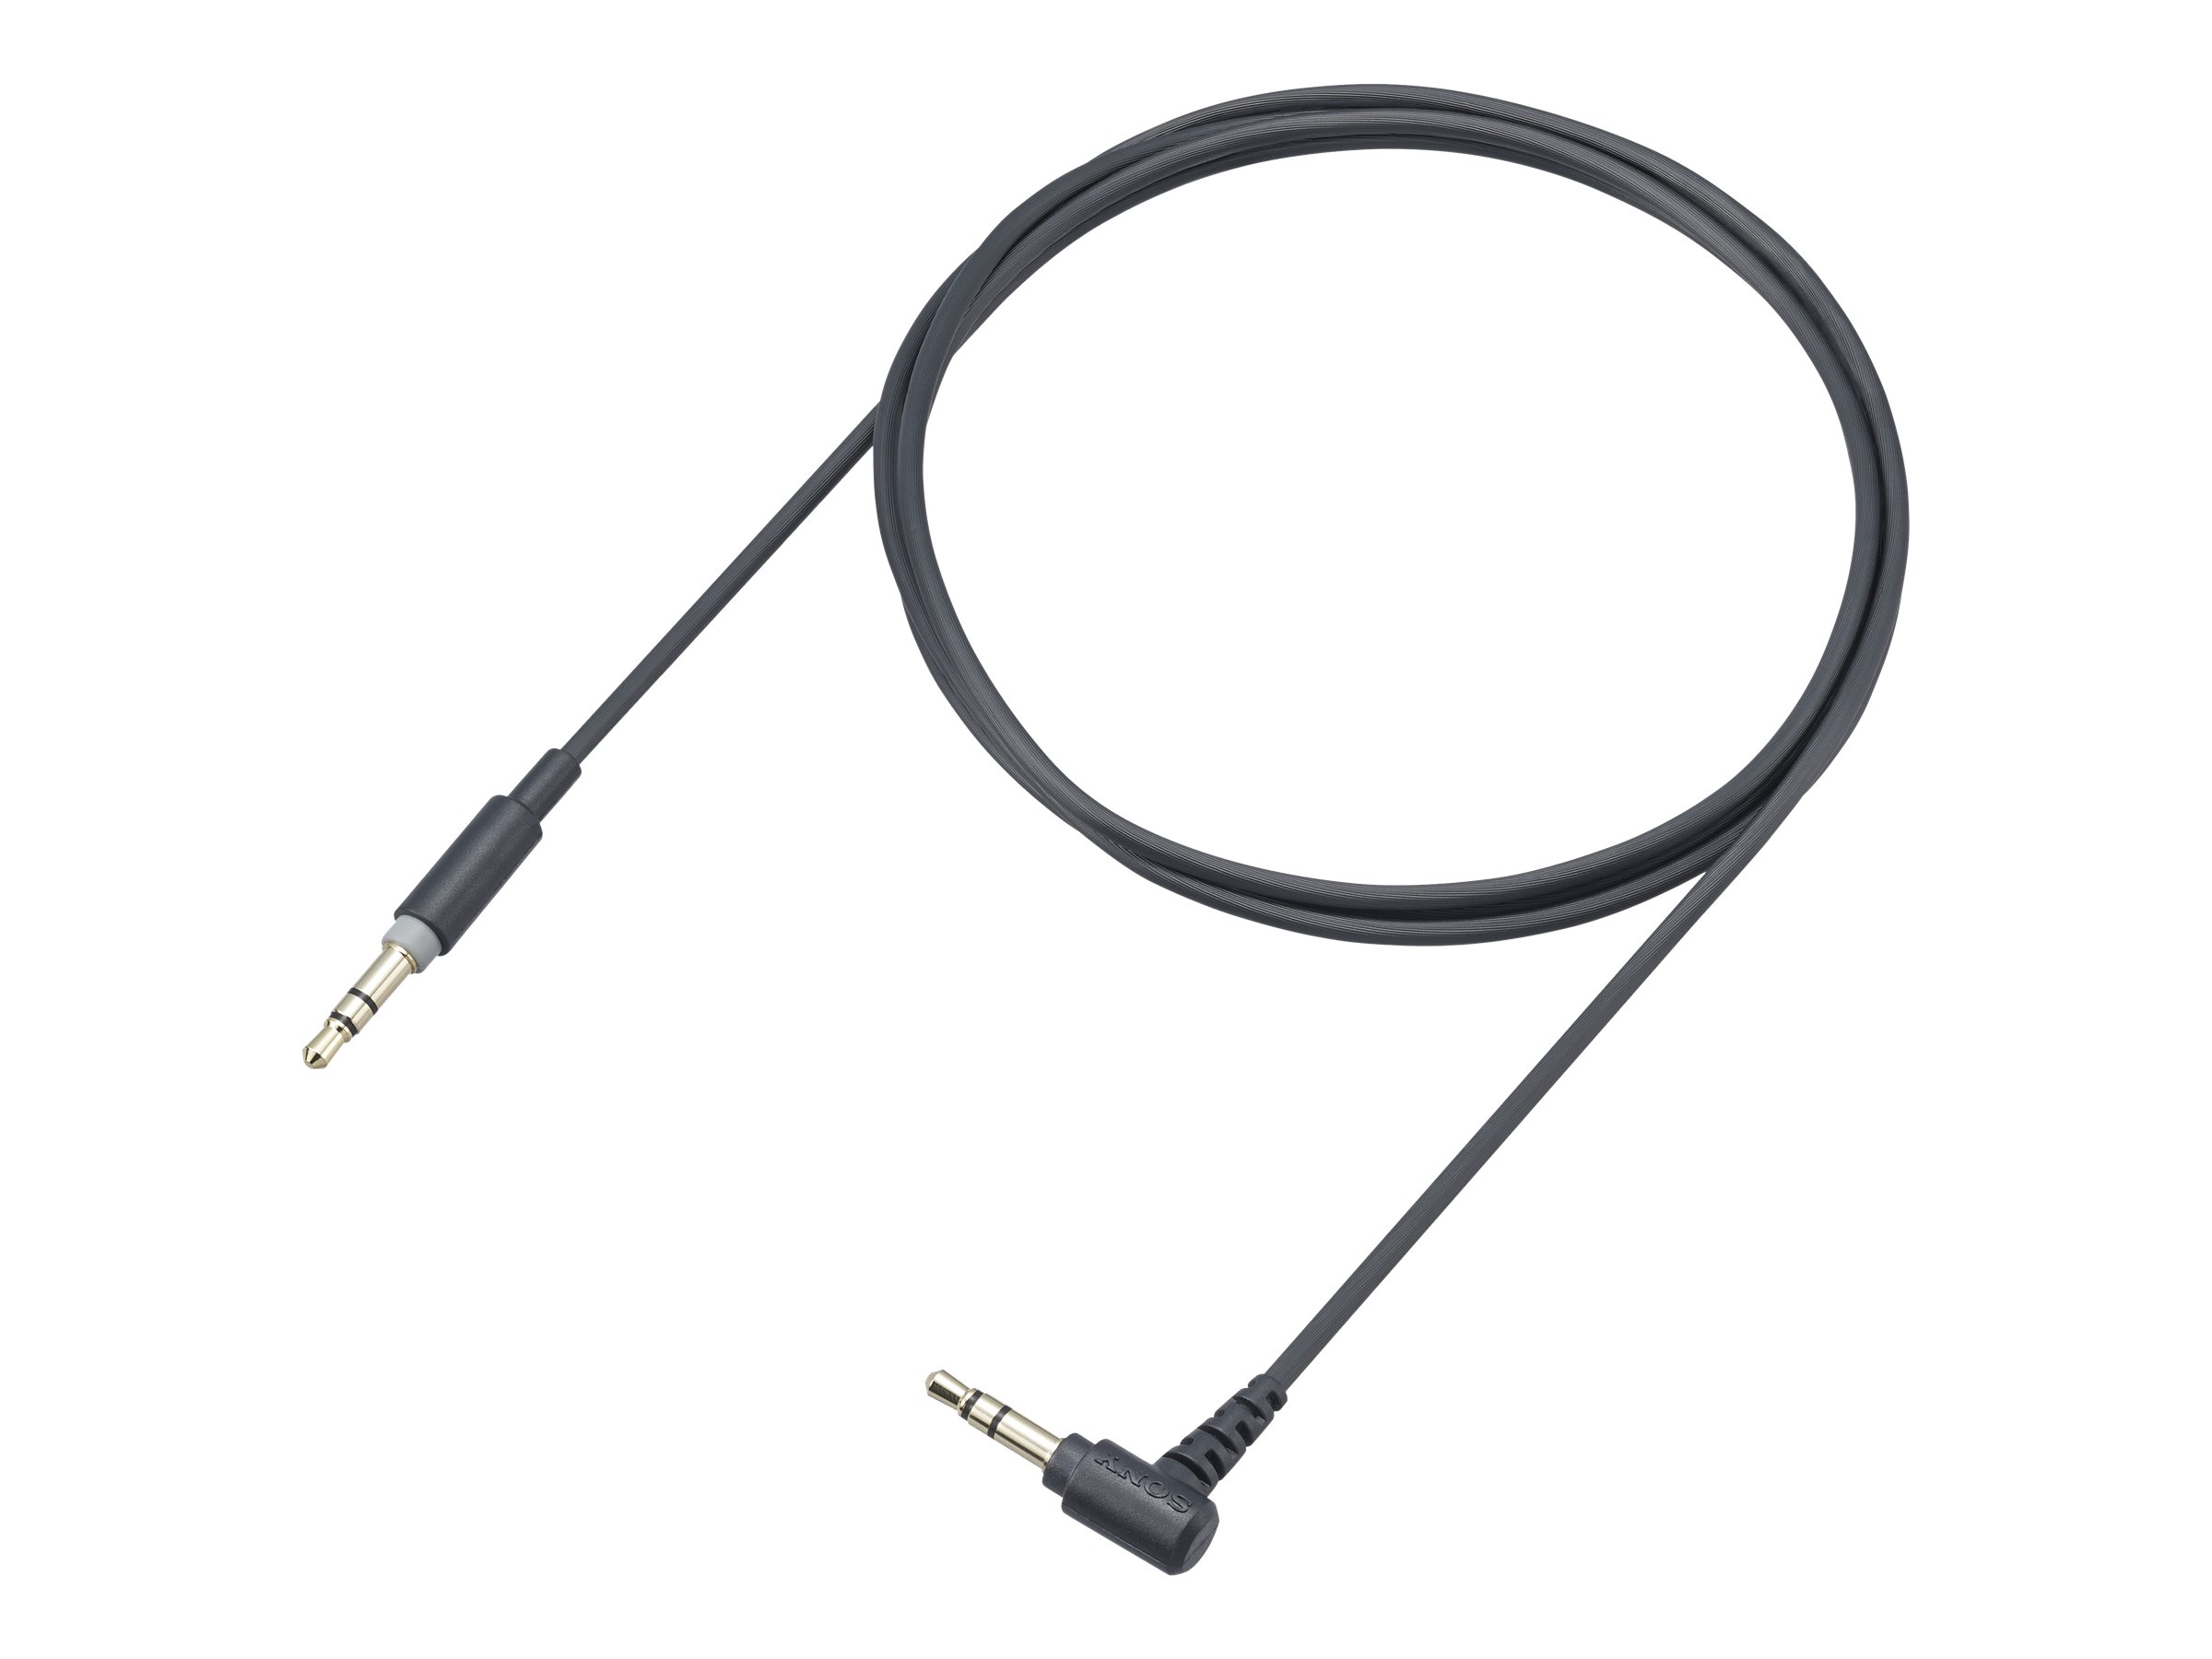 wh-ch700n driver for mac